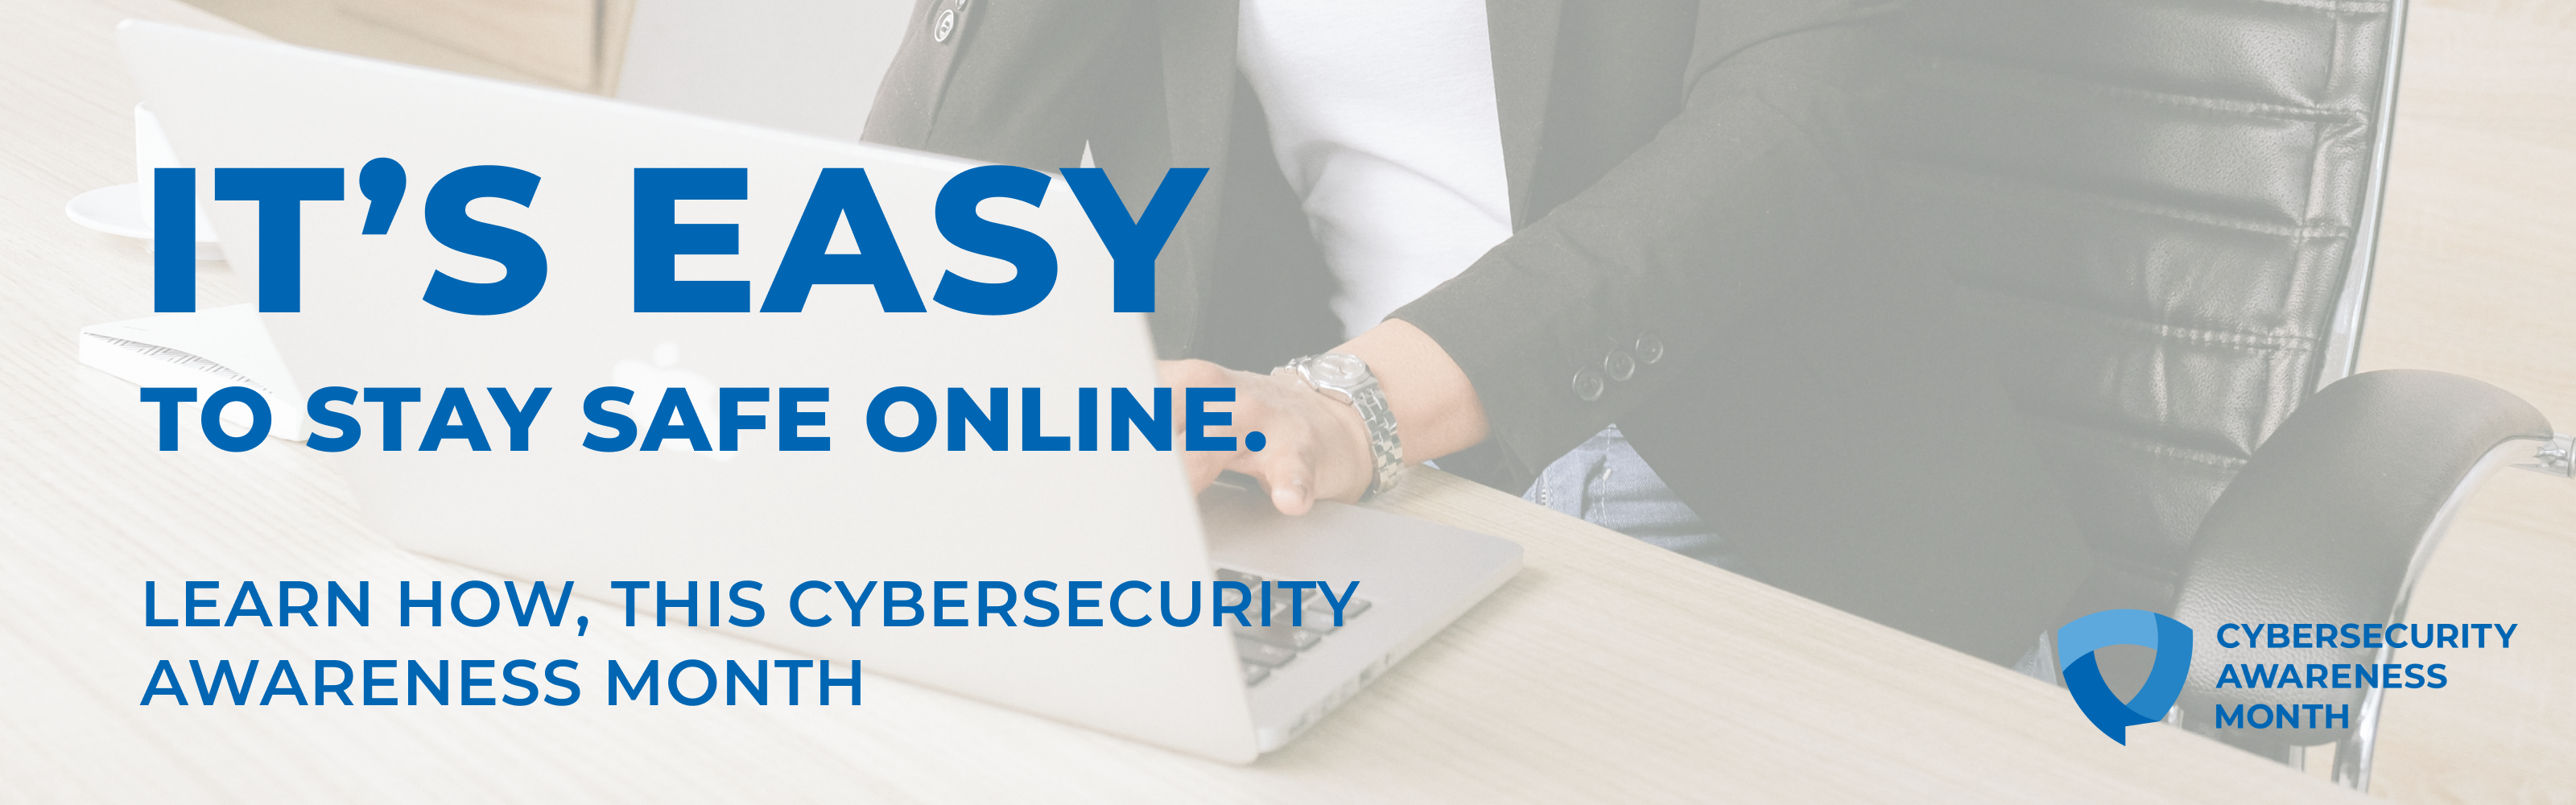 It’s easy to stay safe online. Learn how this cybersecurity awareness month.